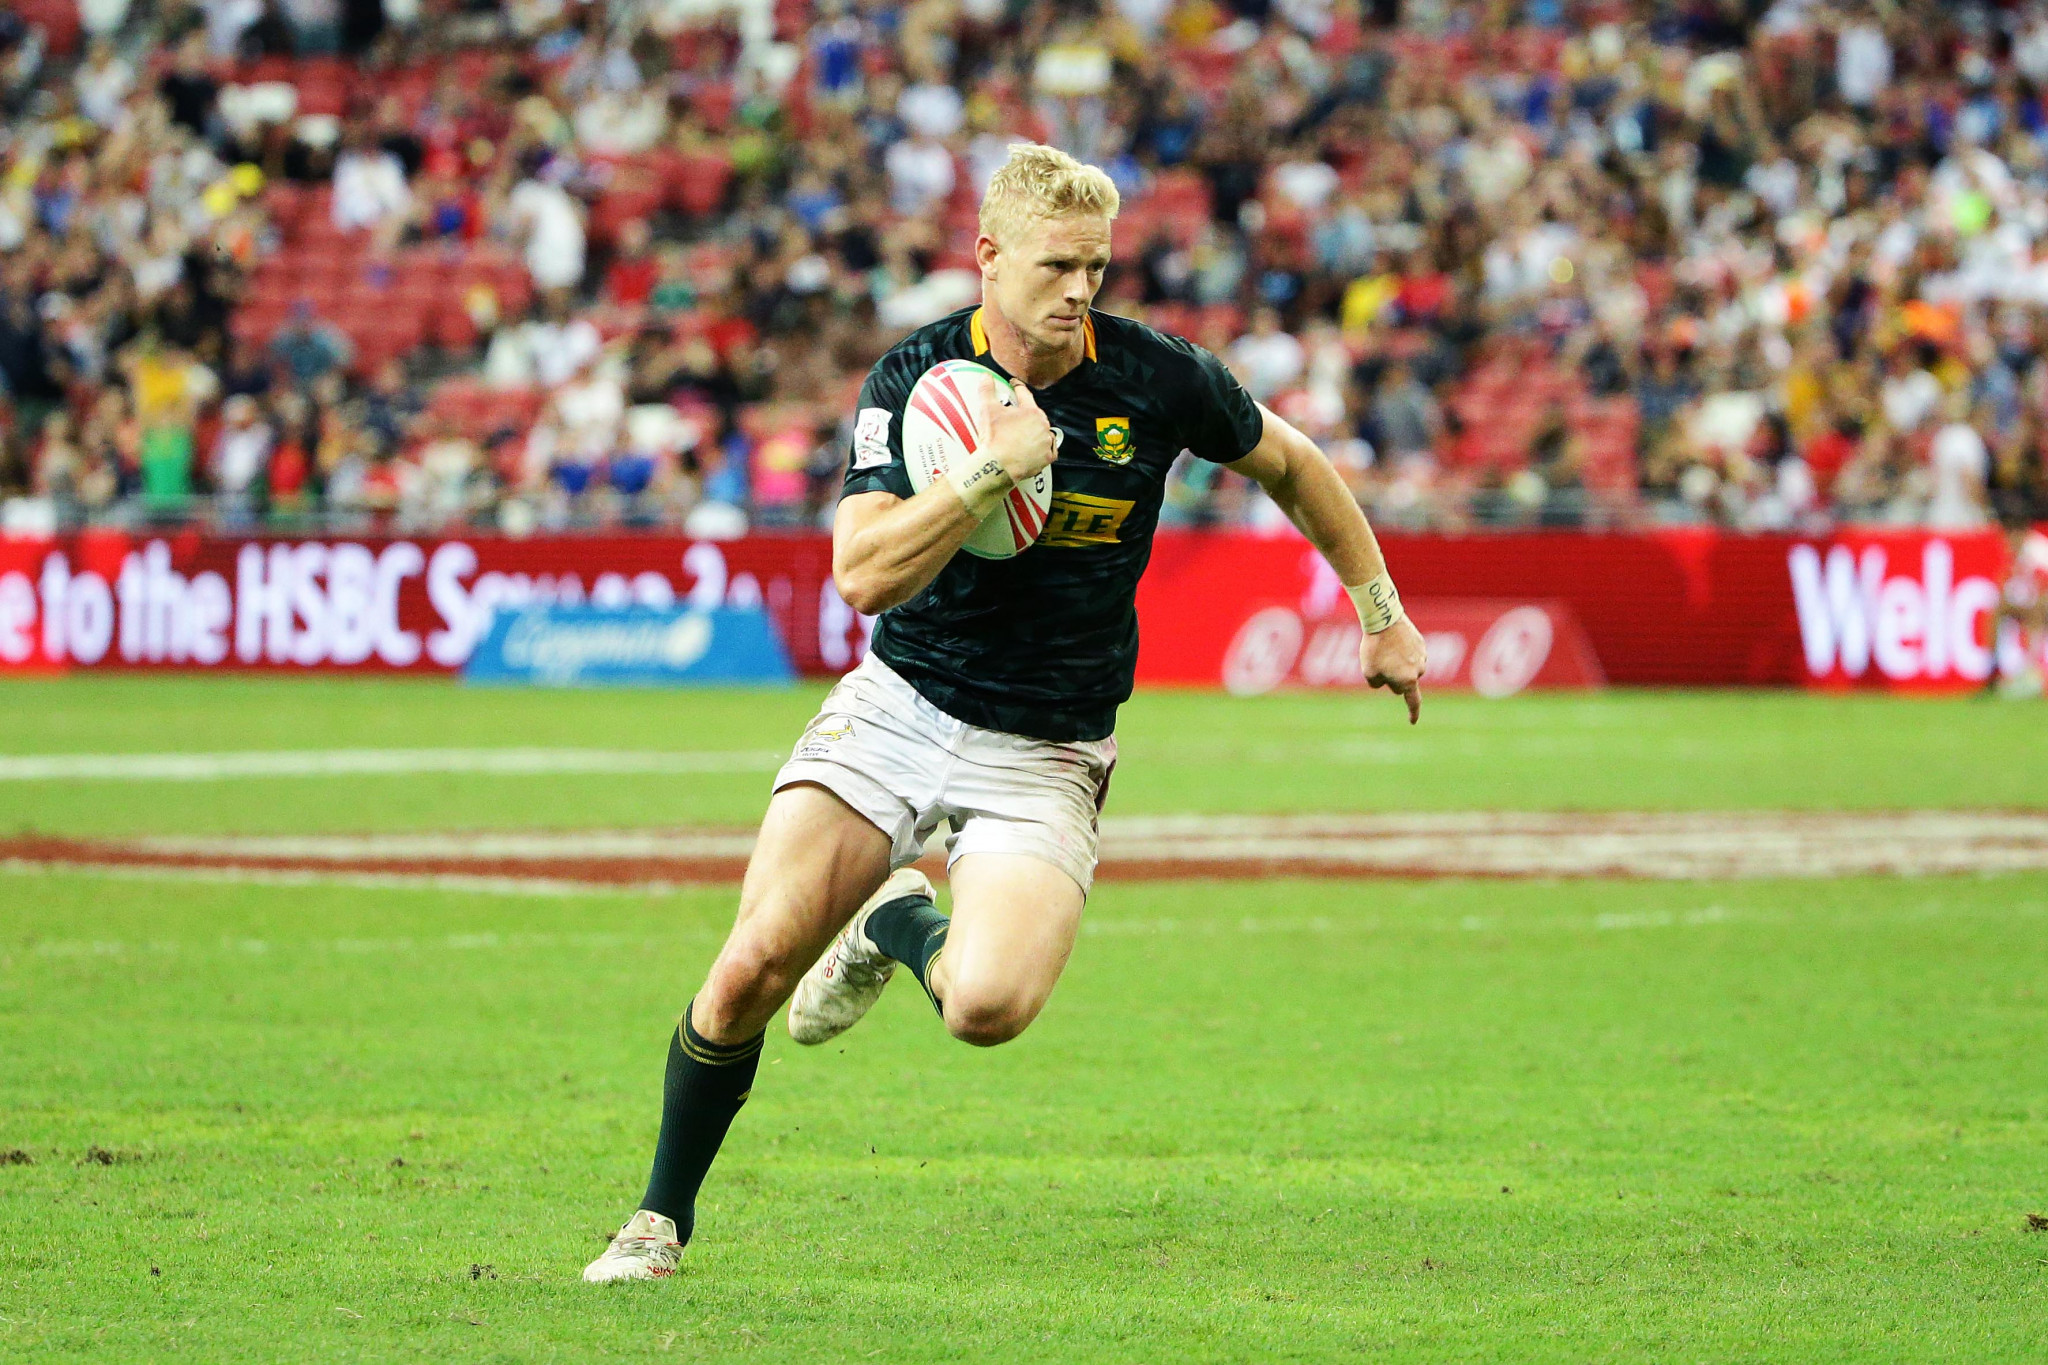 Defending champions South Africa experience mixed day at men's World Rugby Sevens Series tournament in Toulouse